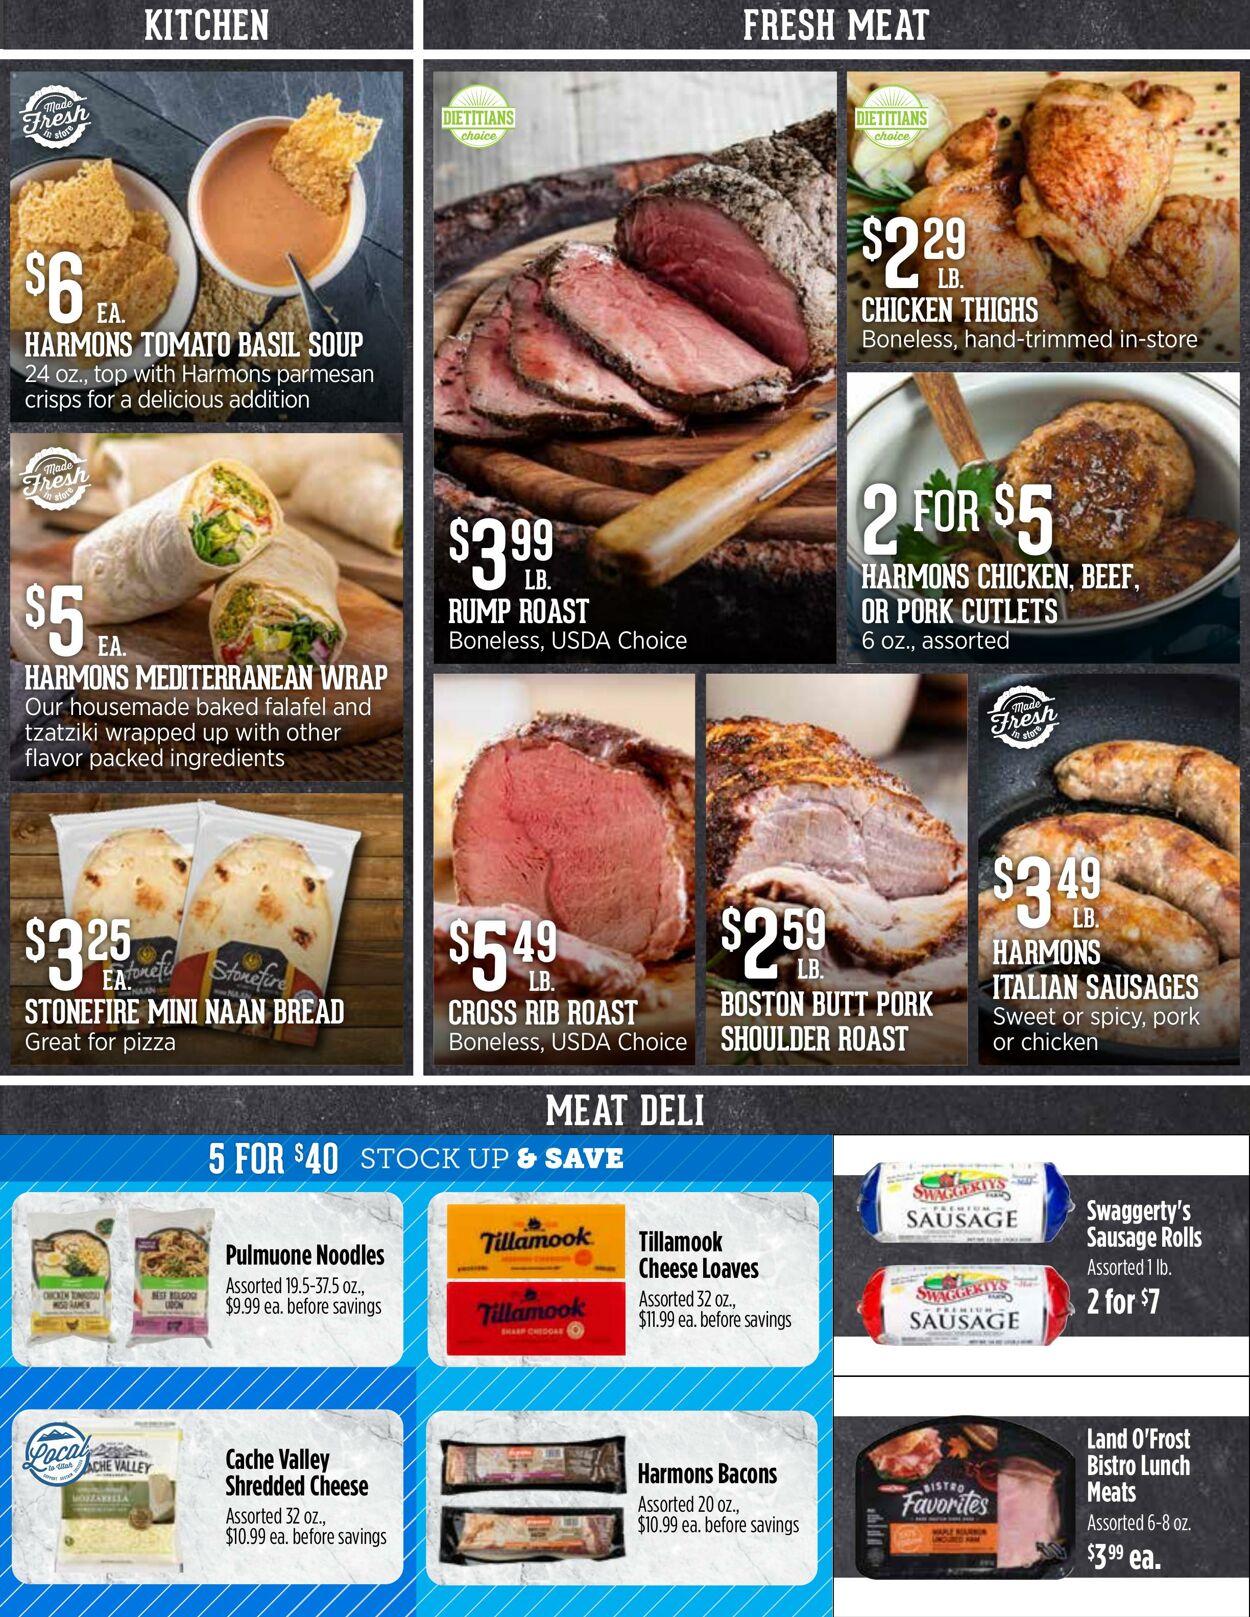 Weekly ad Harmons Grocery 01/10/2023 - 01/16/2023